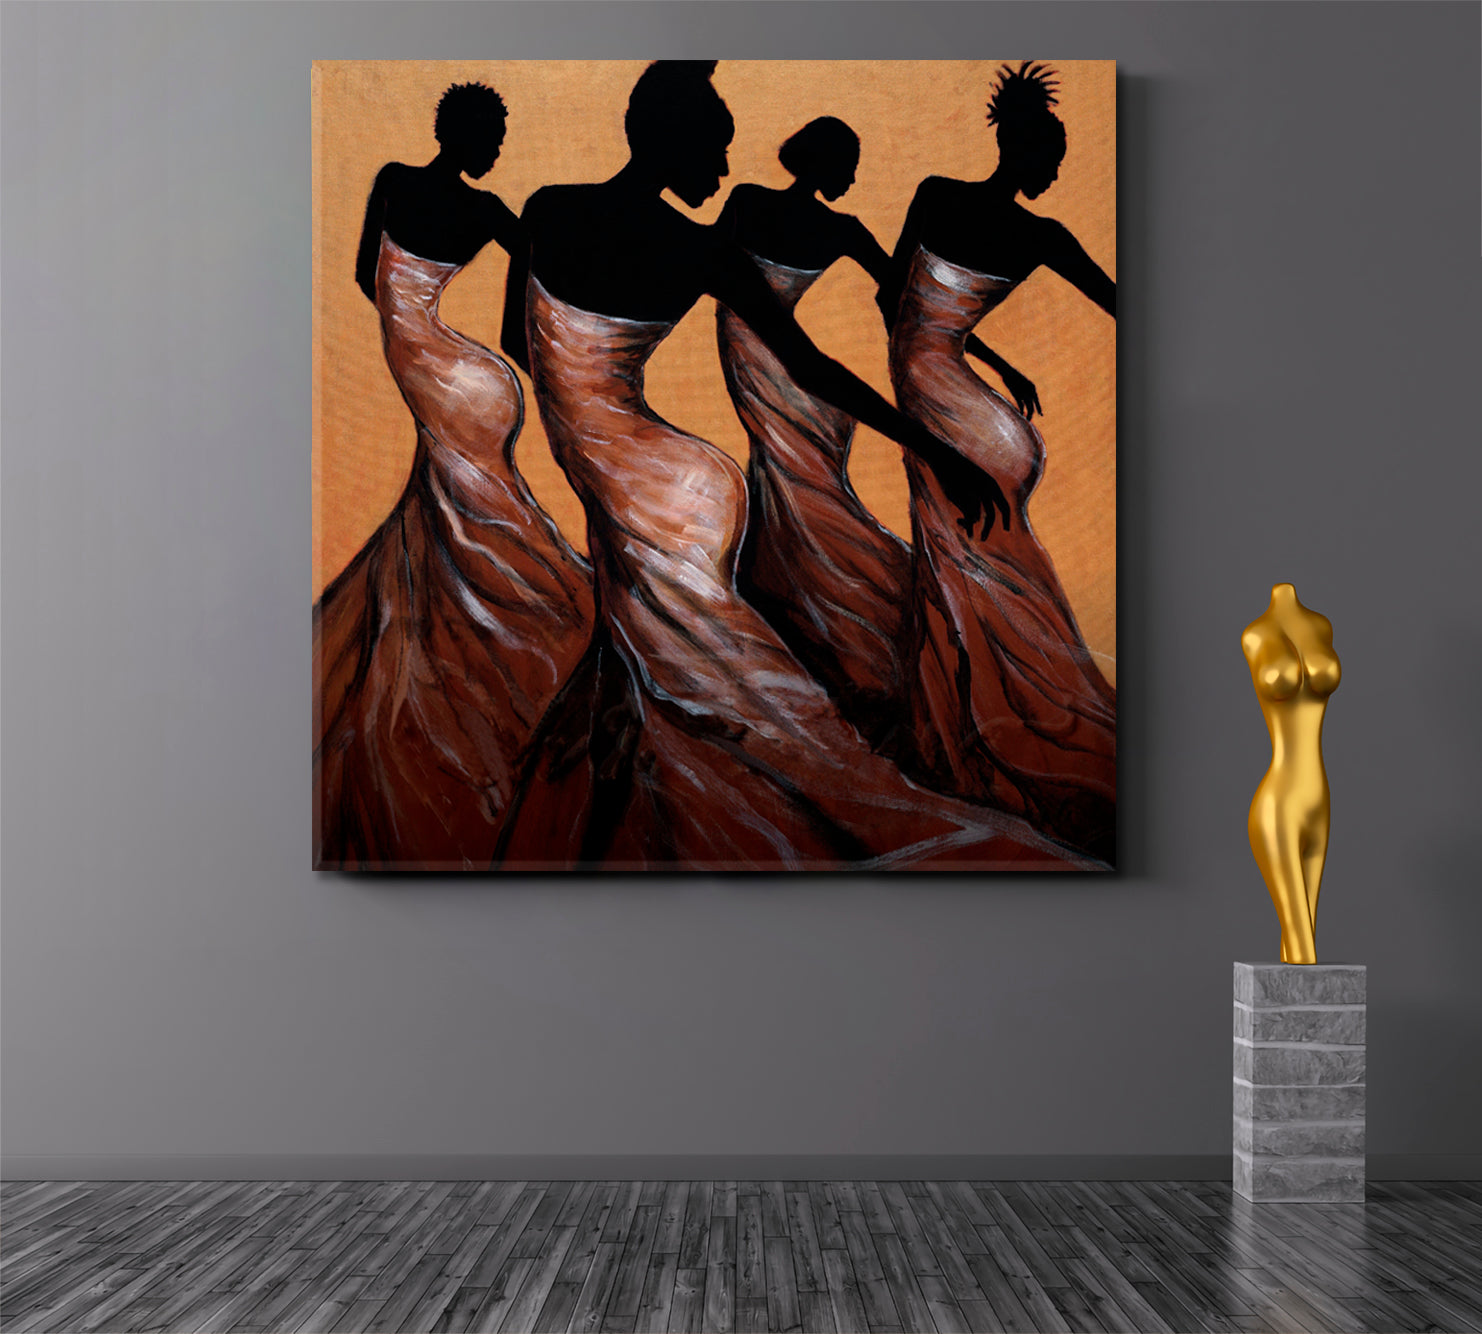 FAITH IN MOTION Graceful Motion Dance Beautiful African American | Square Pop Culture Canvas Print Artesty 1 Panel 12"x12" 